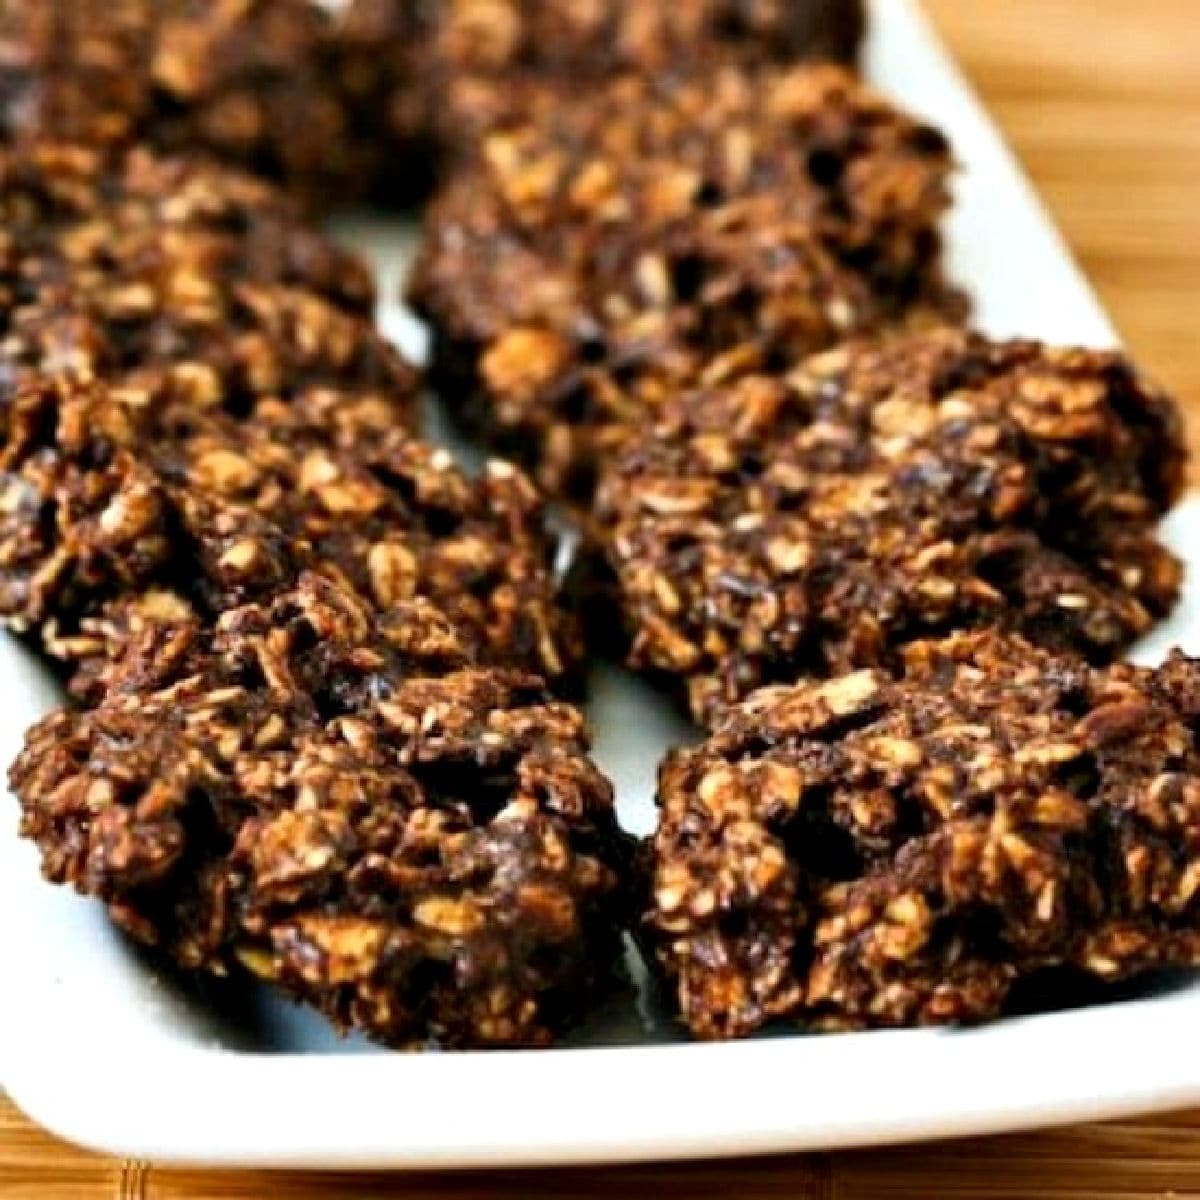 Square image for Sugar-Free Flourless Chocolate Oatmeal Cluster Cookies shown on white serving dish.